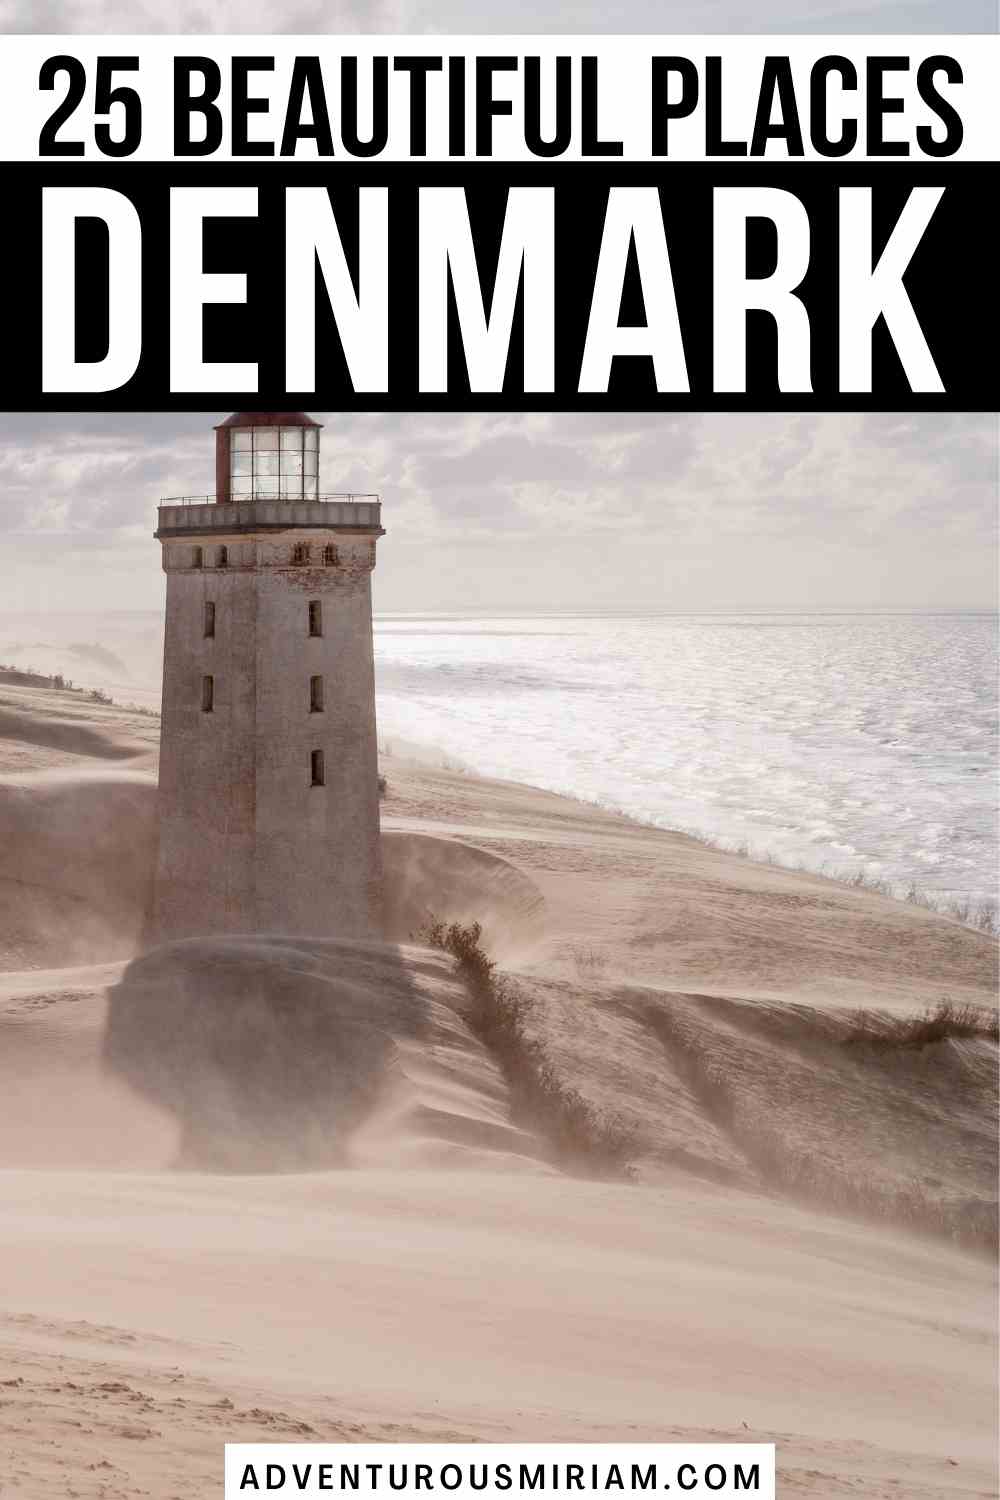 Places to visit in Denmark. Denmark travel places to visit. Denmark photography beautiful places. Denmark nature beautiful places. Denmark beautiful places. Denmark places to visit. Beautiful places in denmark. things to do in denmark bucket lists. Denmark things to do. Bucket list denmark. Travel bucket list denmark. Visit denmark bucket lists.